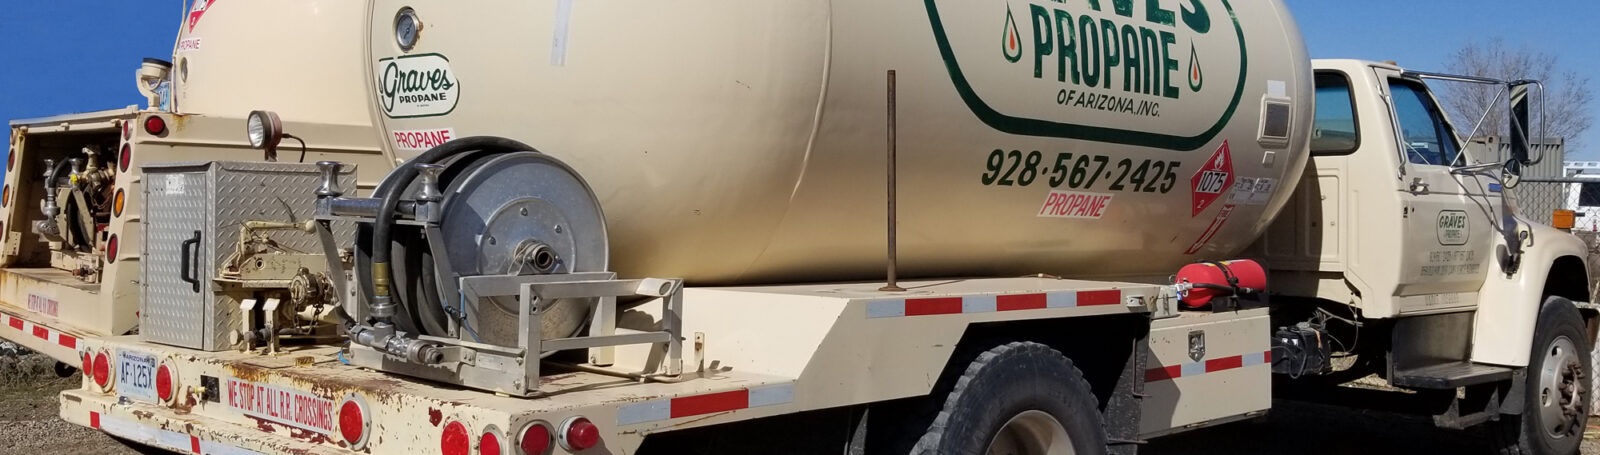 Propane Delivery Truck, Golden Valley Office